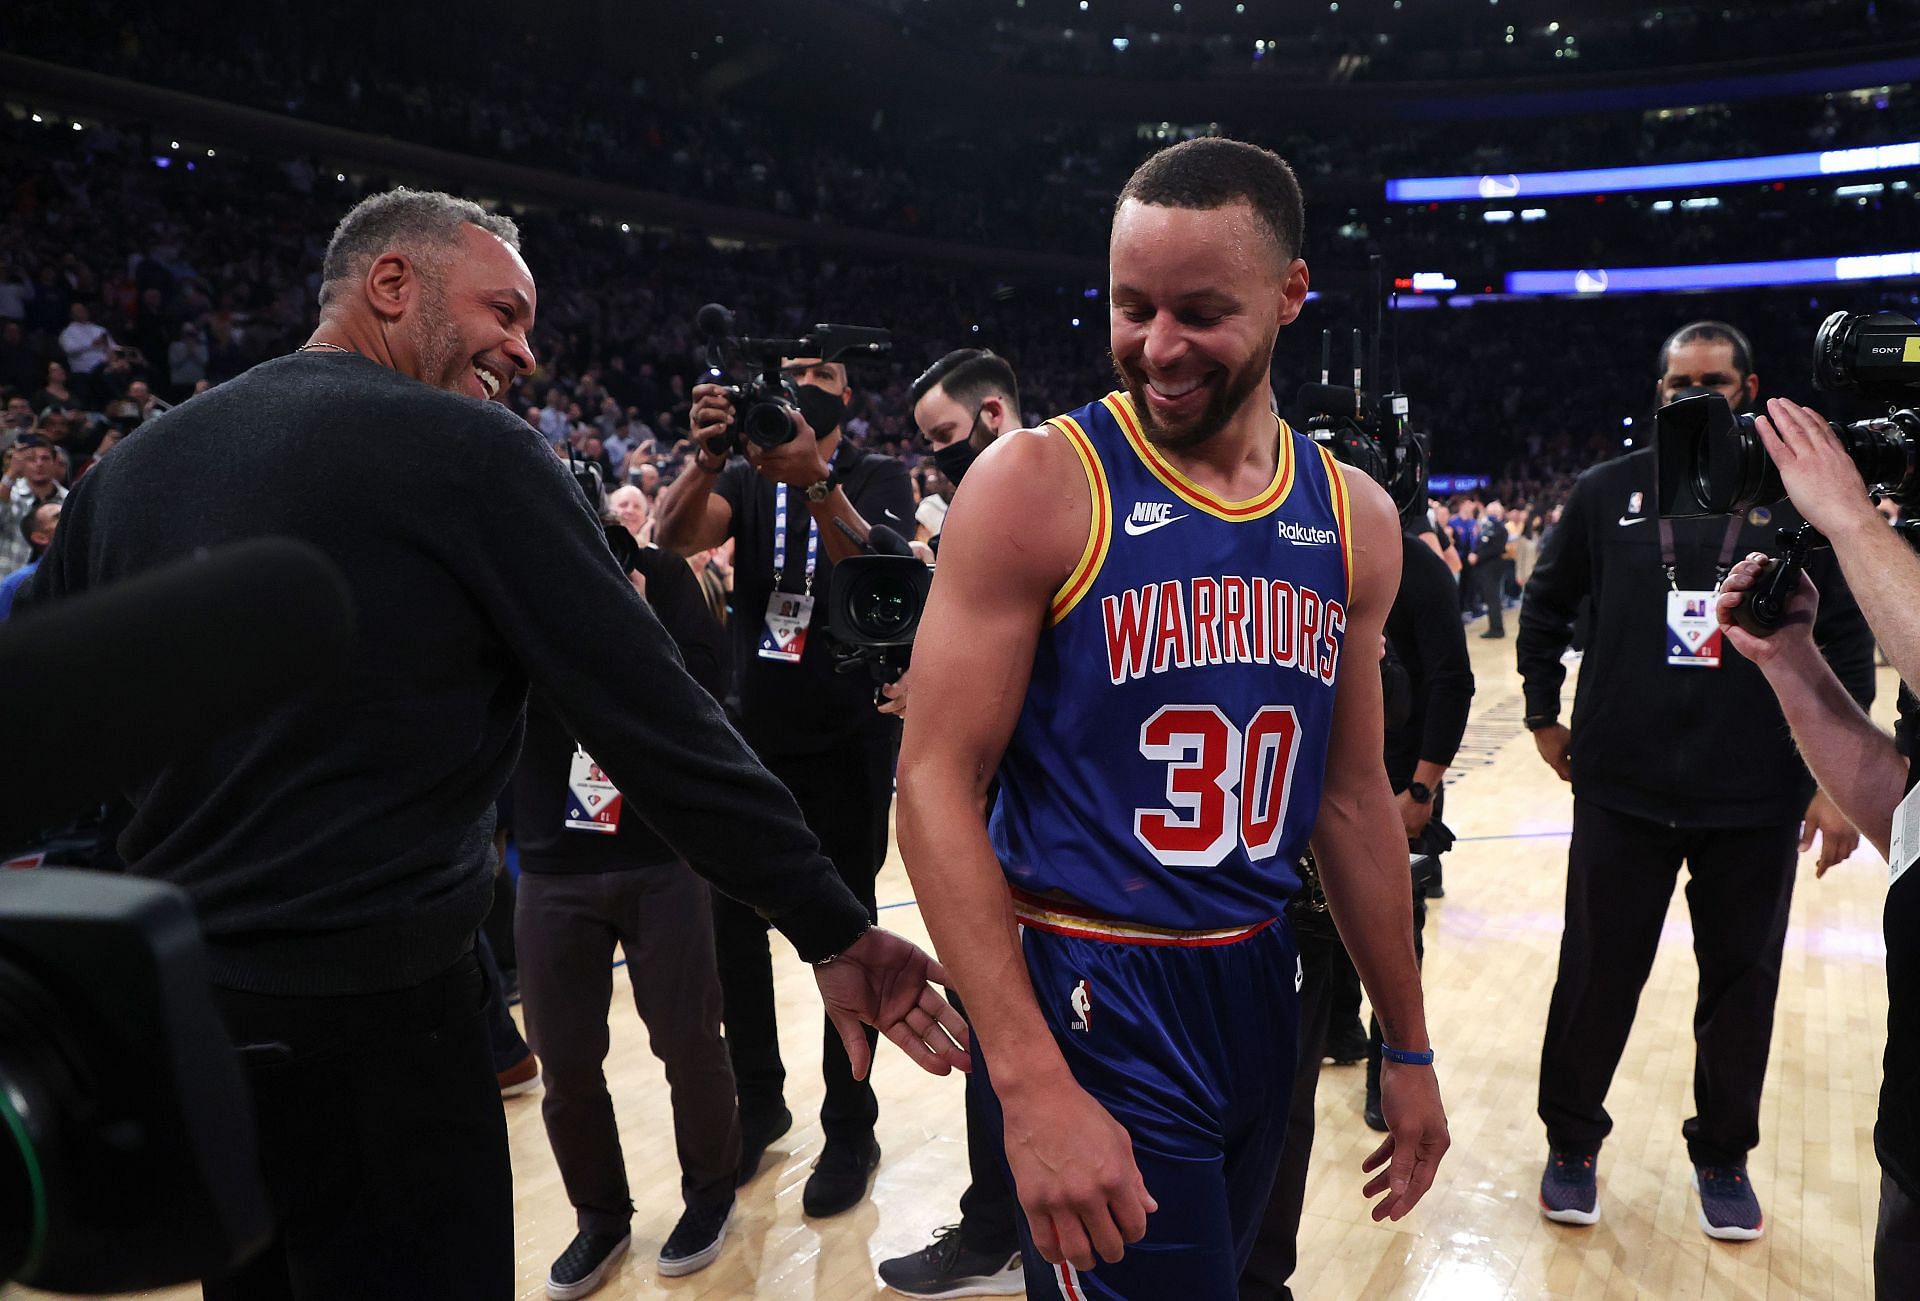 Dell and Steph Curry at the Madison Square Garden in New York City